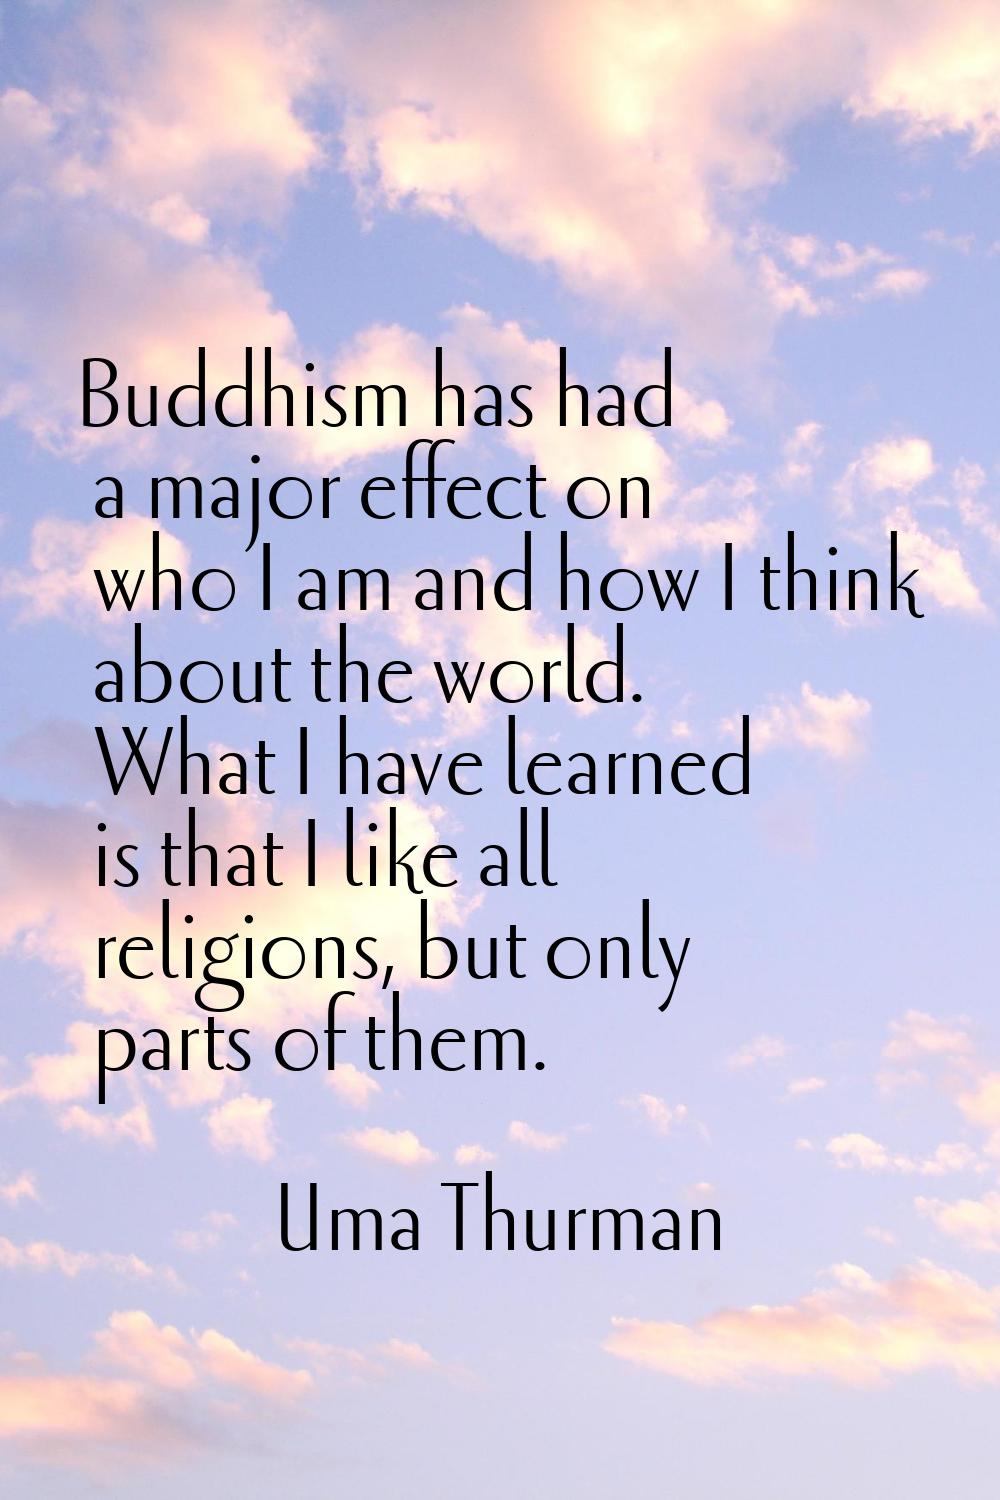 Buddhism has had a major effect on who I am and how I think about the world. What I have learned is